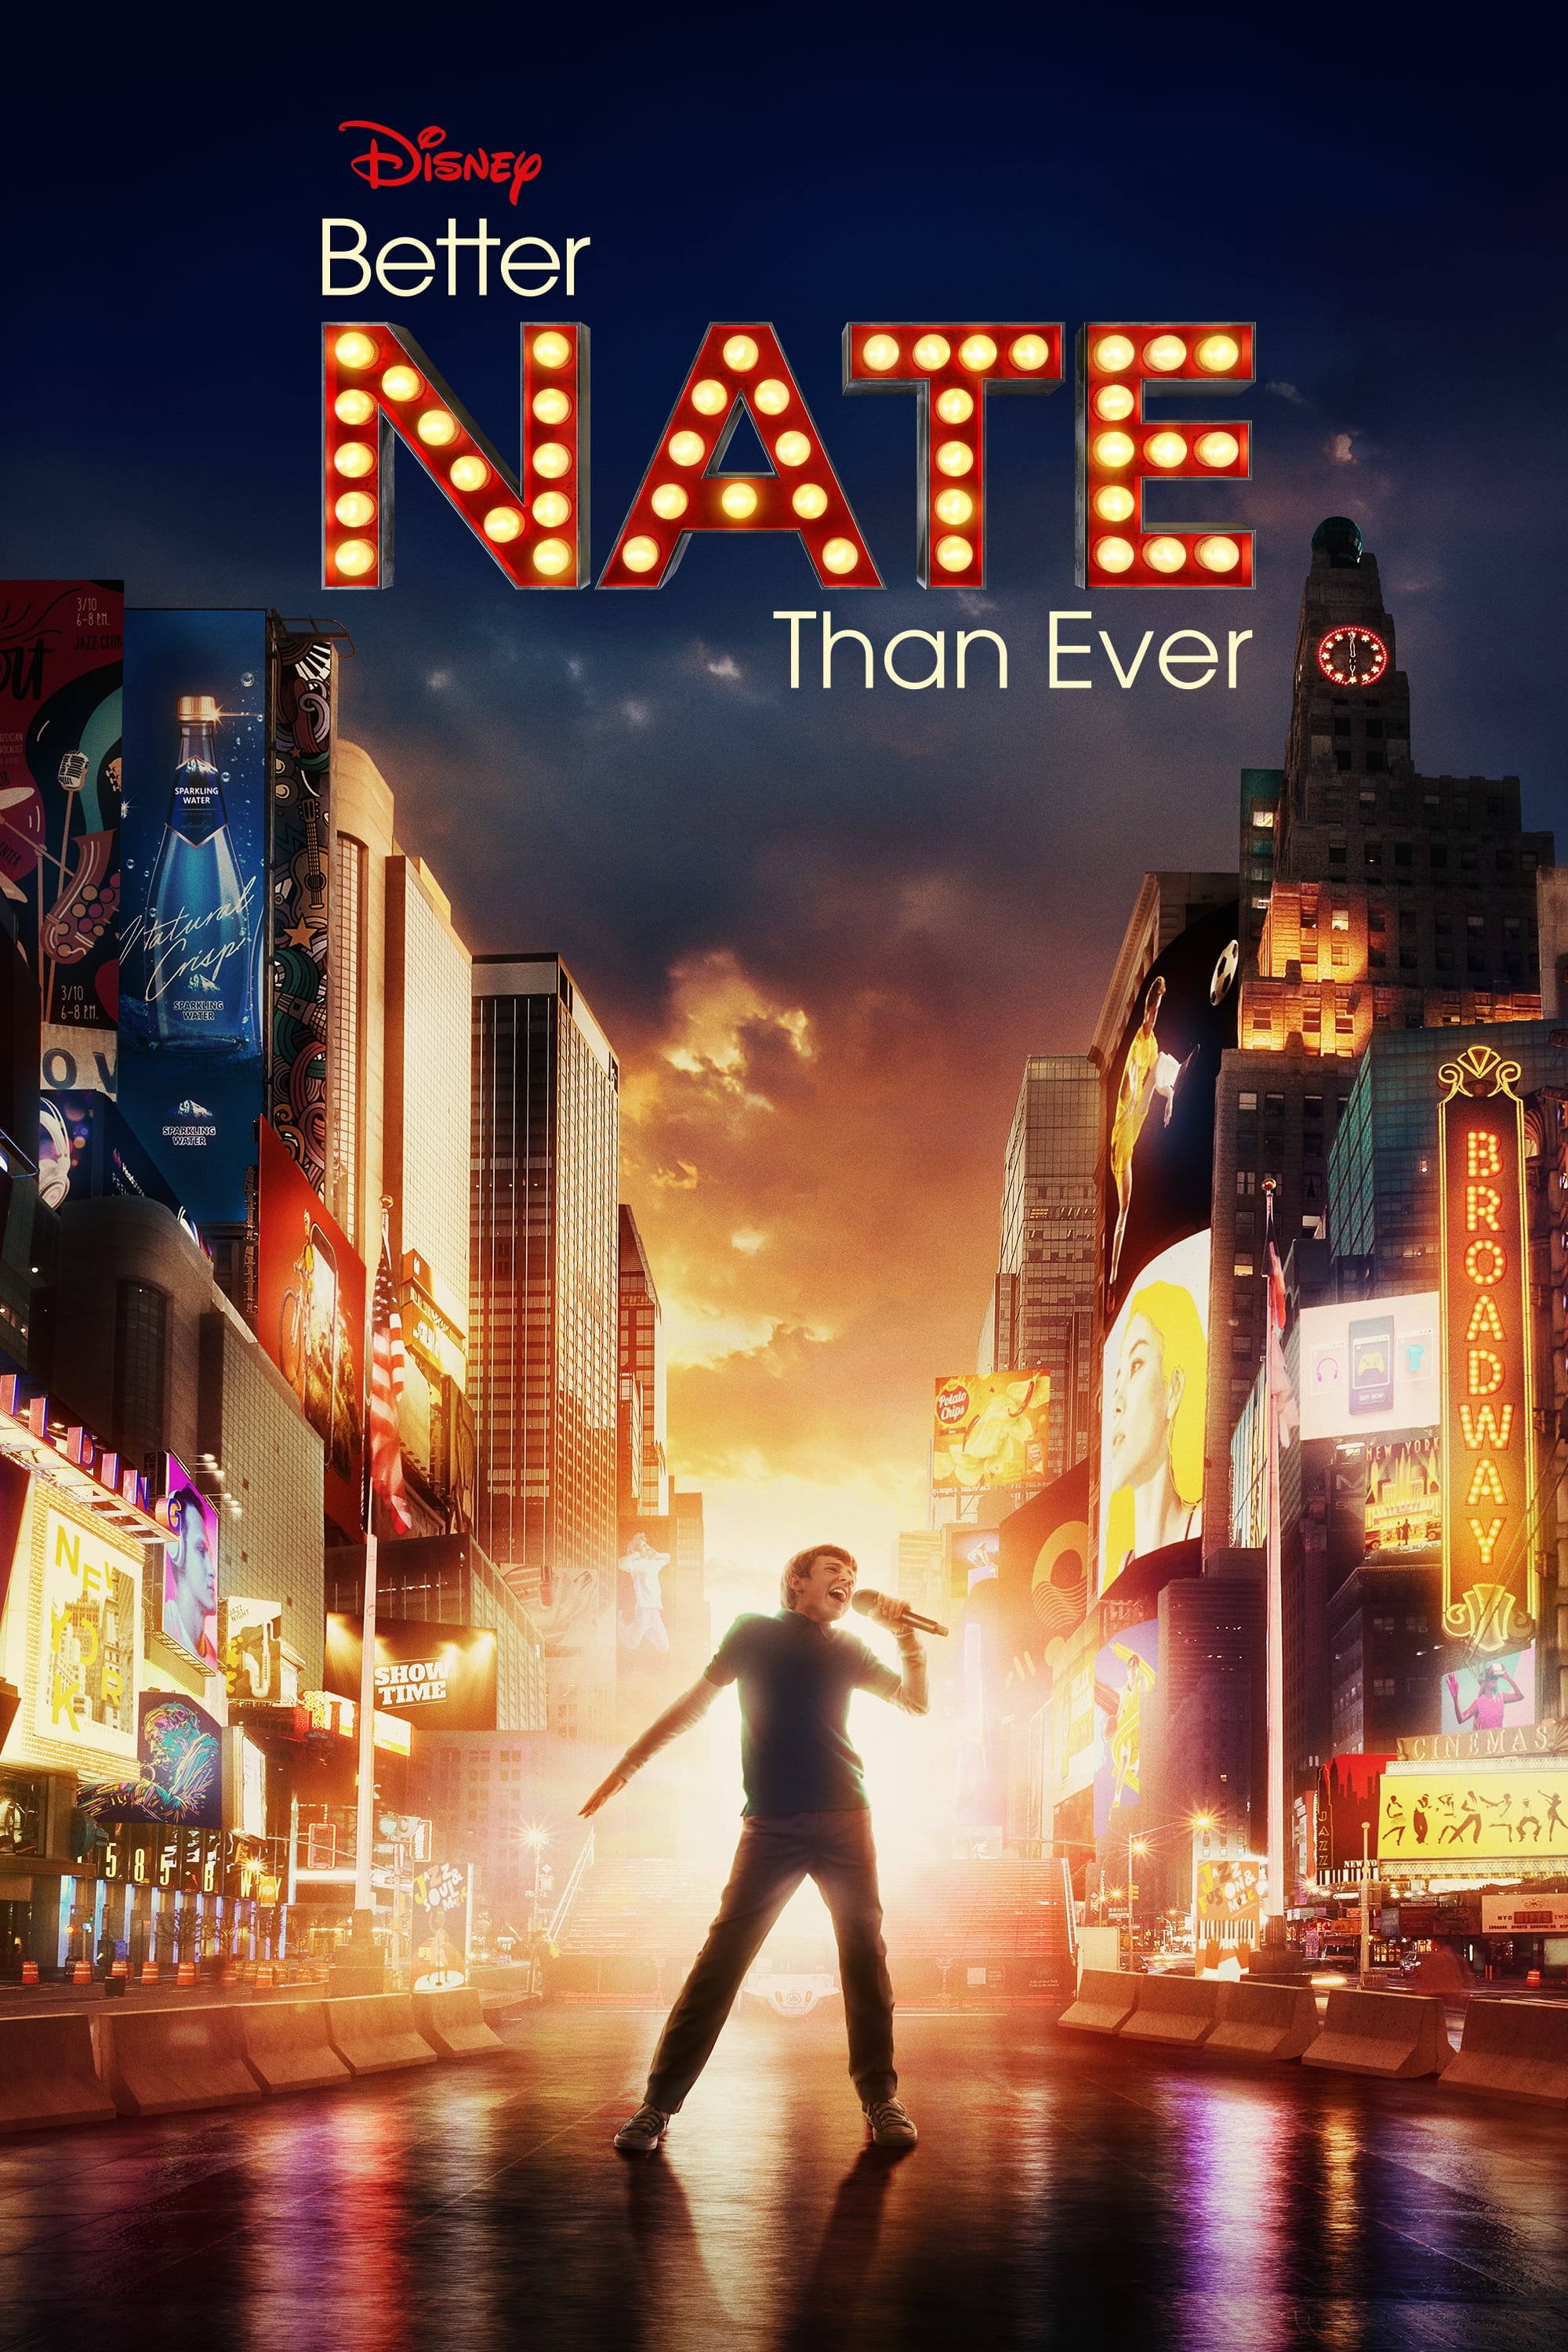 Better Nate Than Ever (2022)